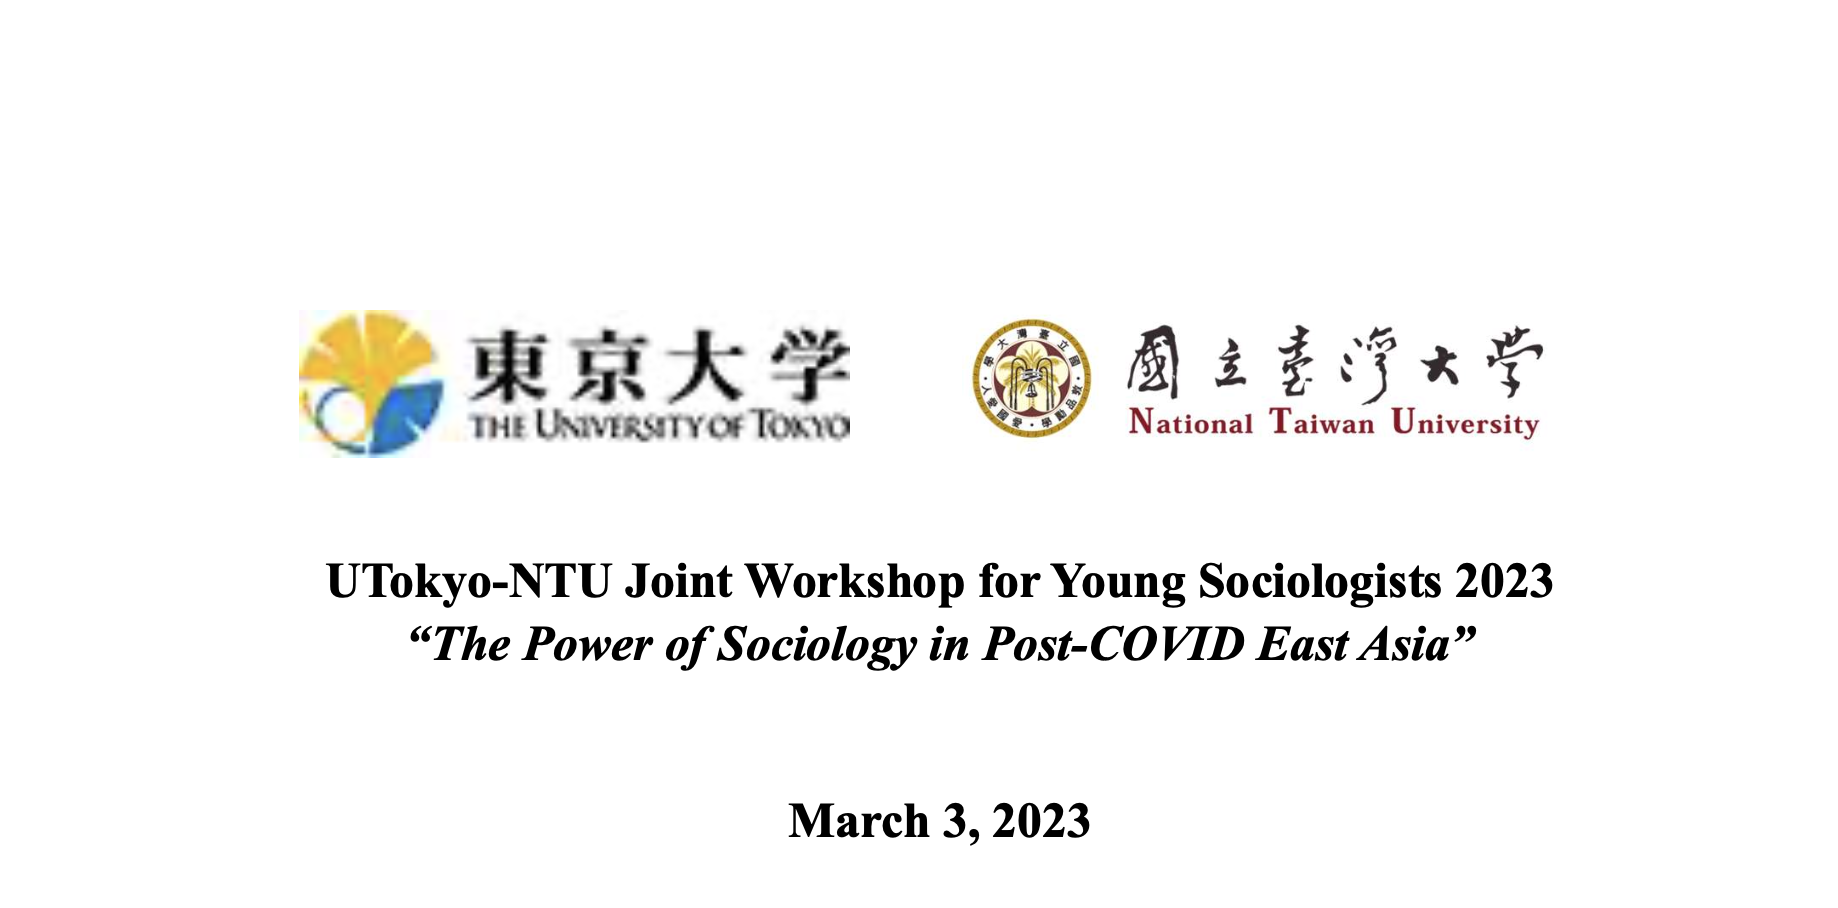 “The Power of Sociology in Post-COVID East Asia”